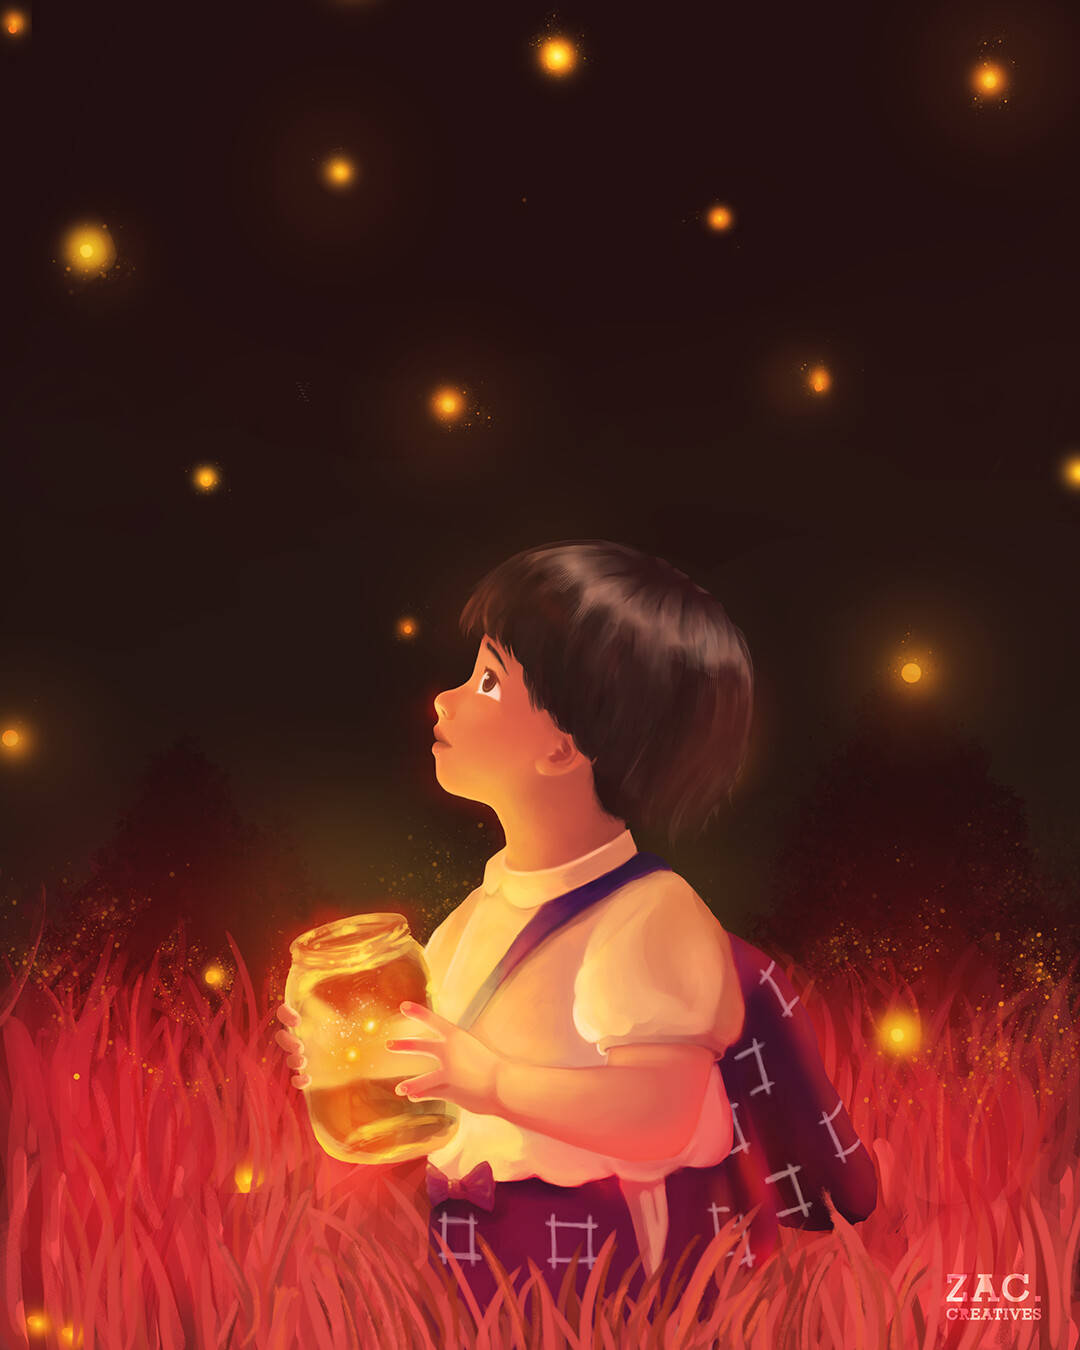 grave-of-the-fireflies